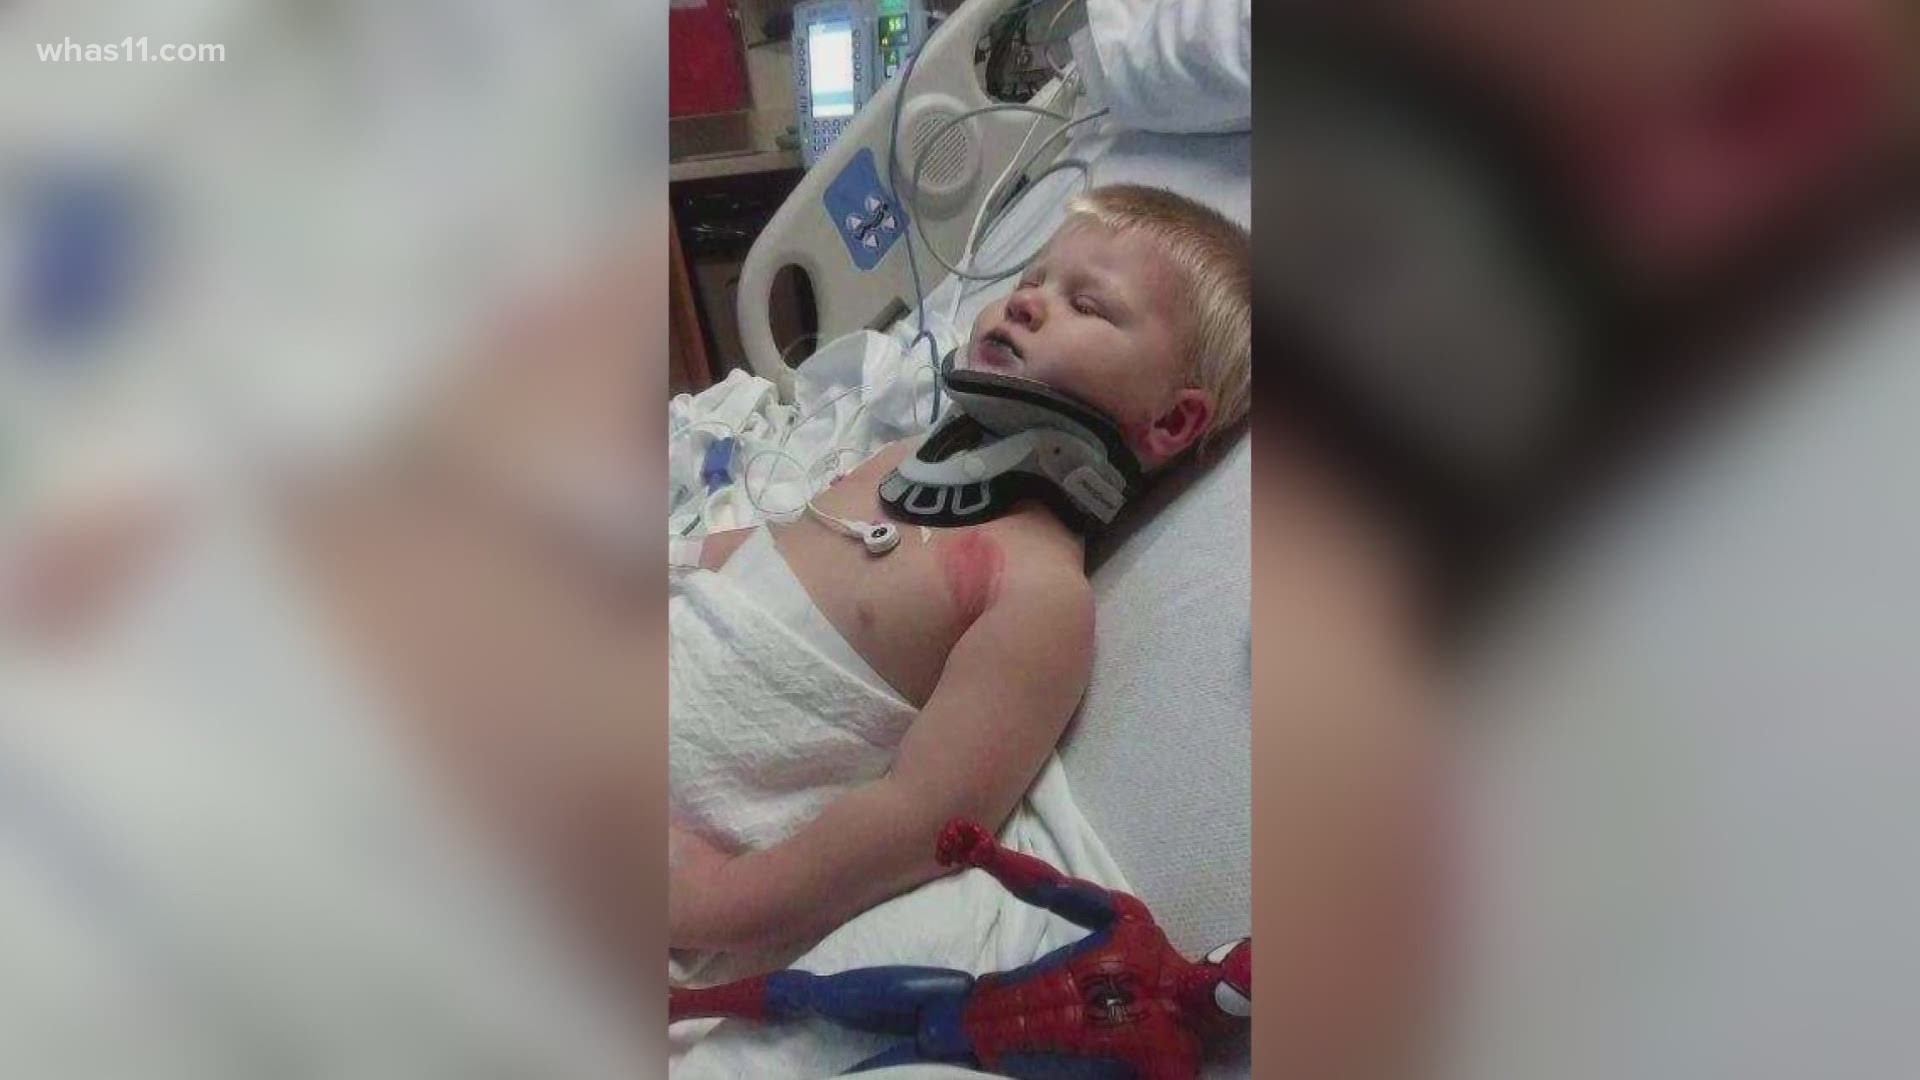 While Lincoln recovers in the hospital, his mom is hoping the driver turns himself in.